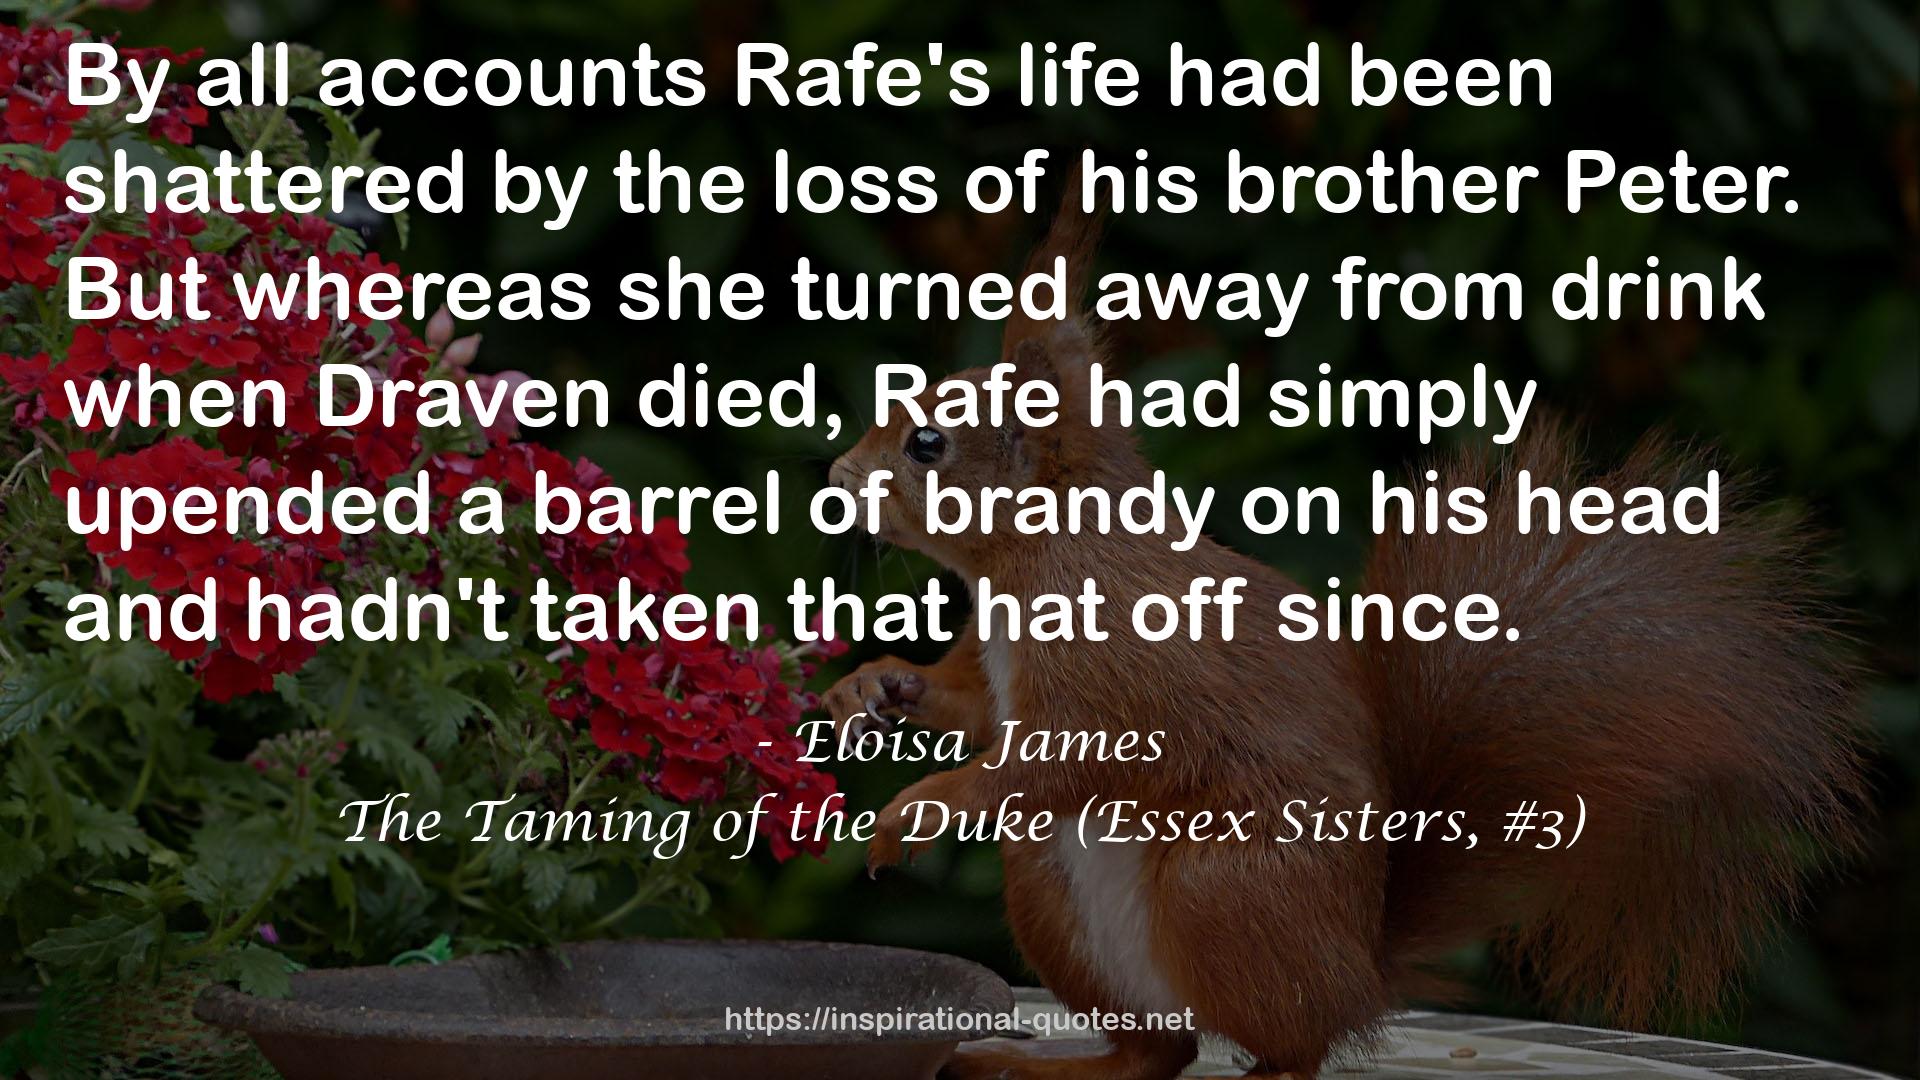 The Taming of the Duke (Essex Sisters, #3) QUOTES